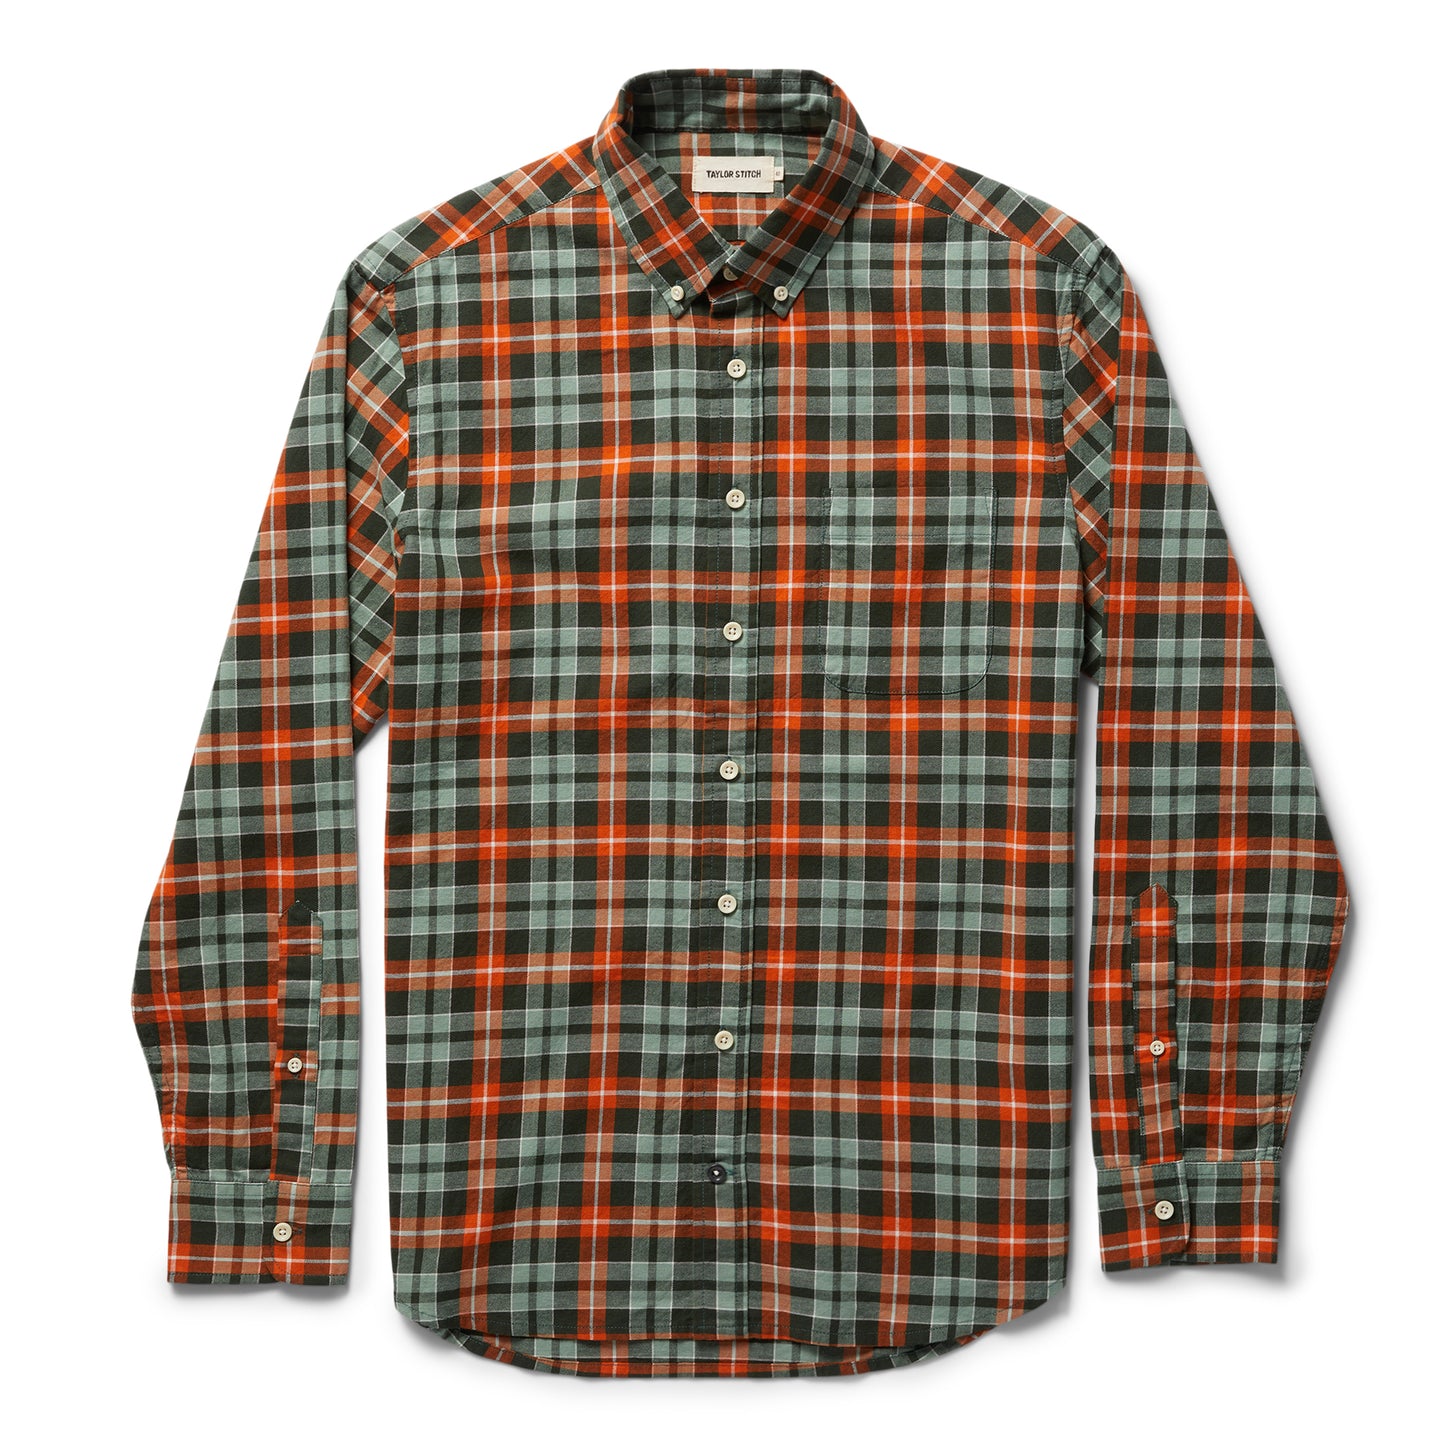 The Jack in Rust Plaid Oxford